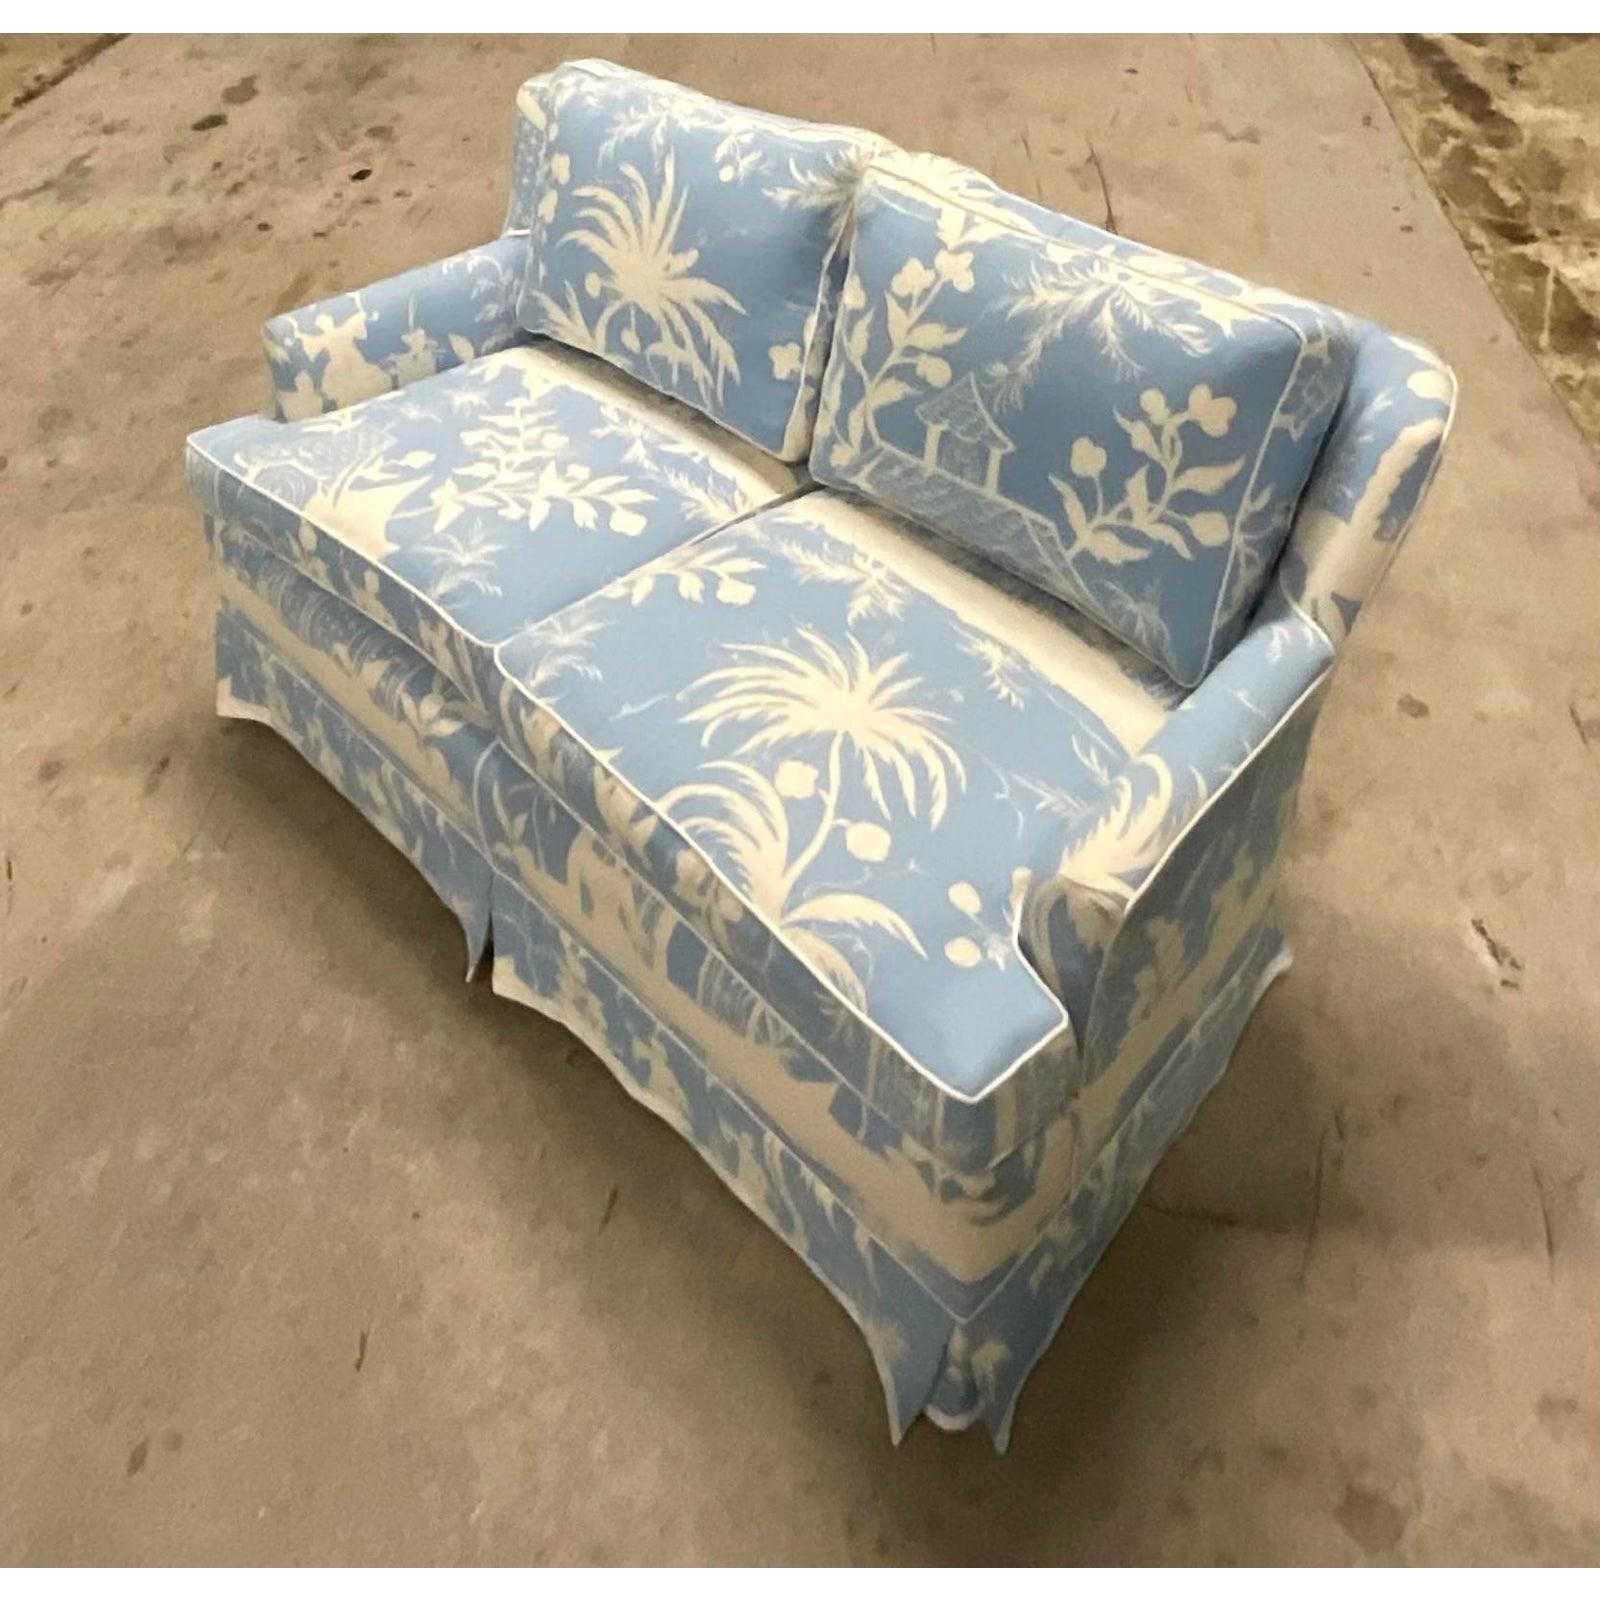 Fabric Vintage Chinoiserie Loveseat With Custom Lavender Quadrille “China Seas” Print